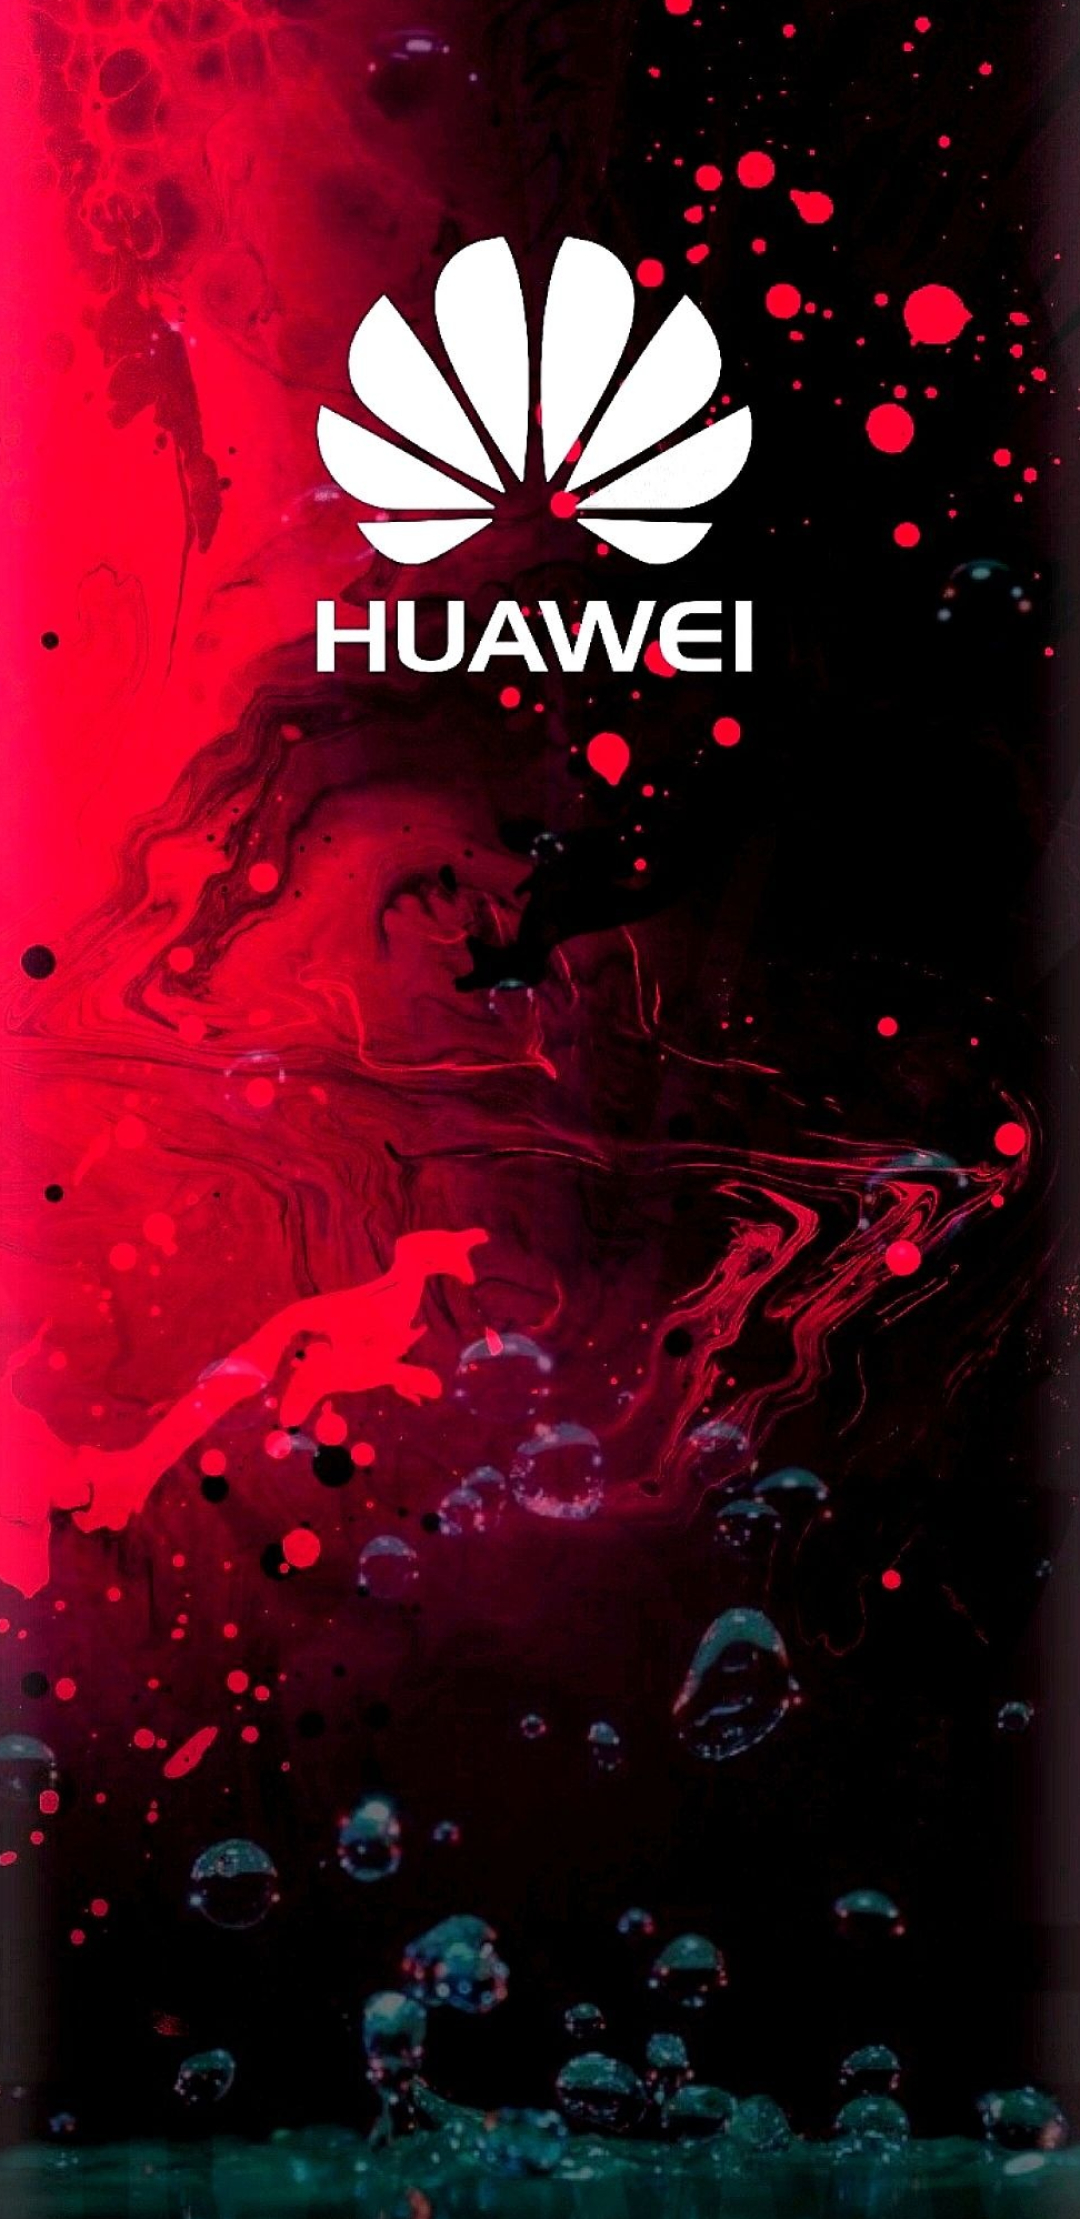 Huawei: The Chinese smartphone and telecom giant with 30 years of history, The company logo. 1080x2220 HD Background.